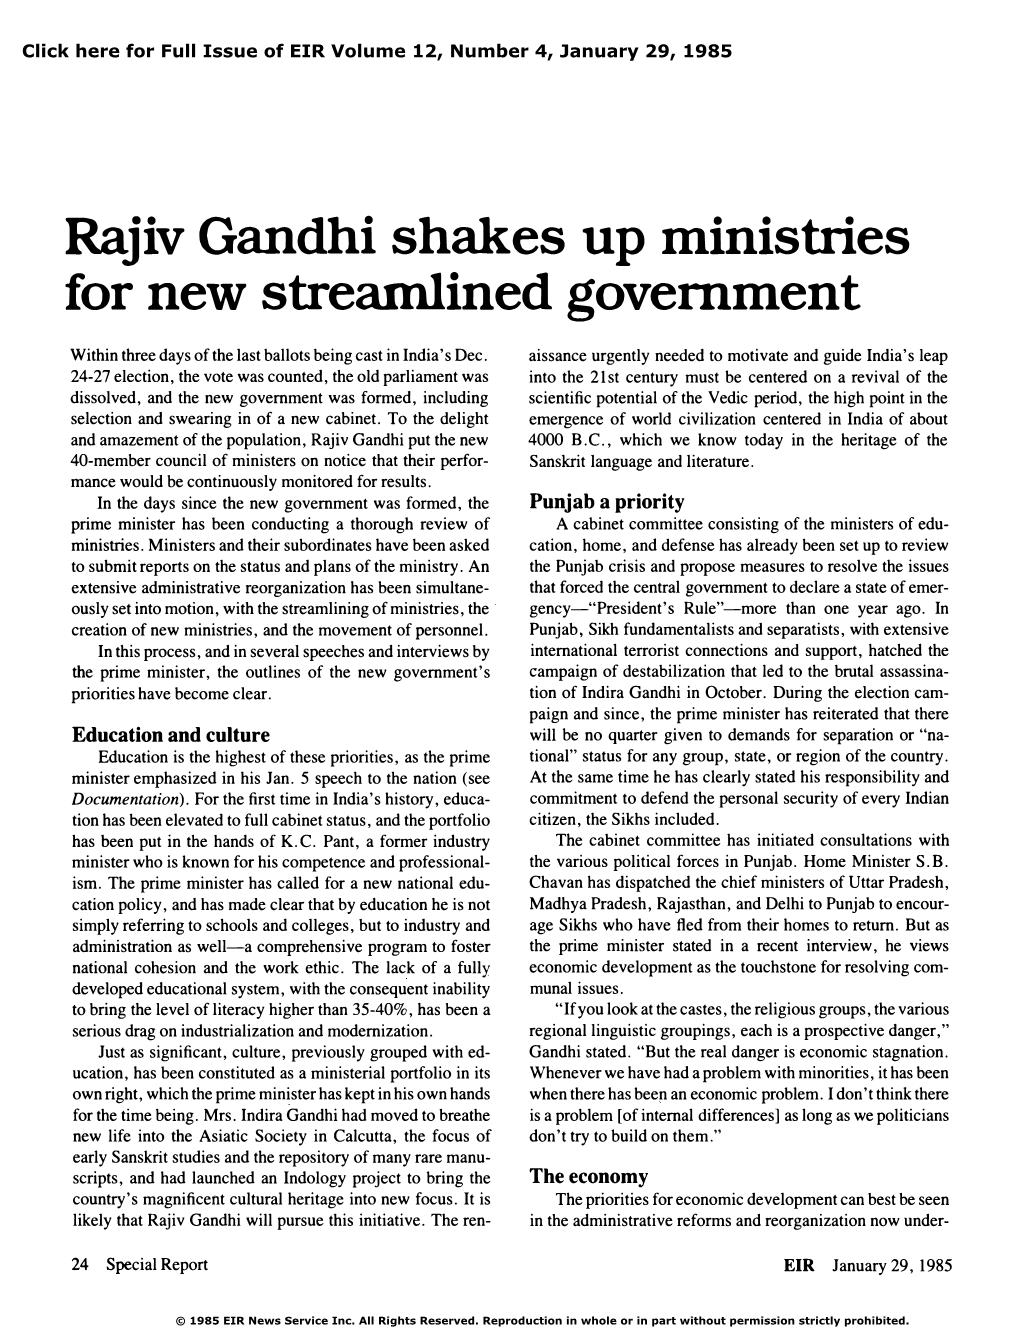 Rajiv Gandhi Shakes up Ministries to Form New Streamlined